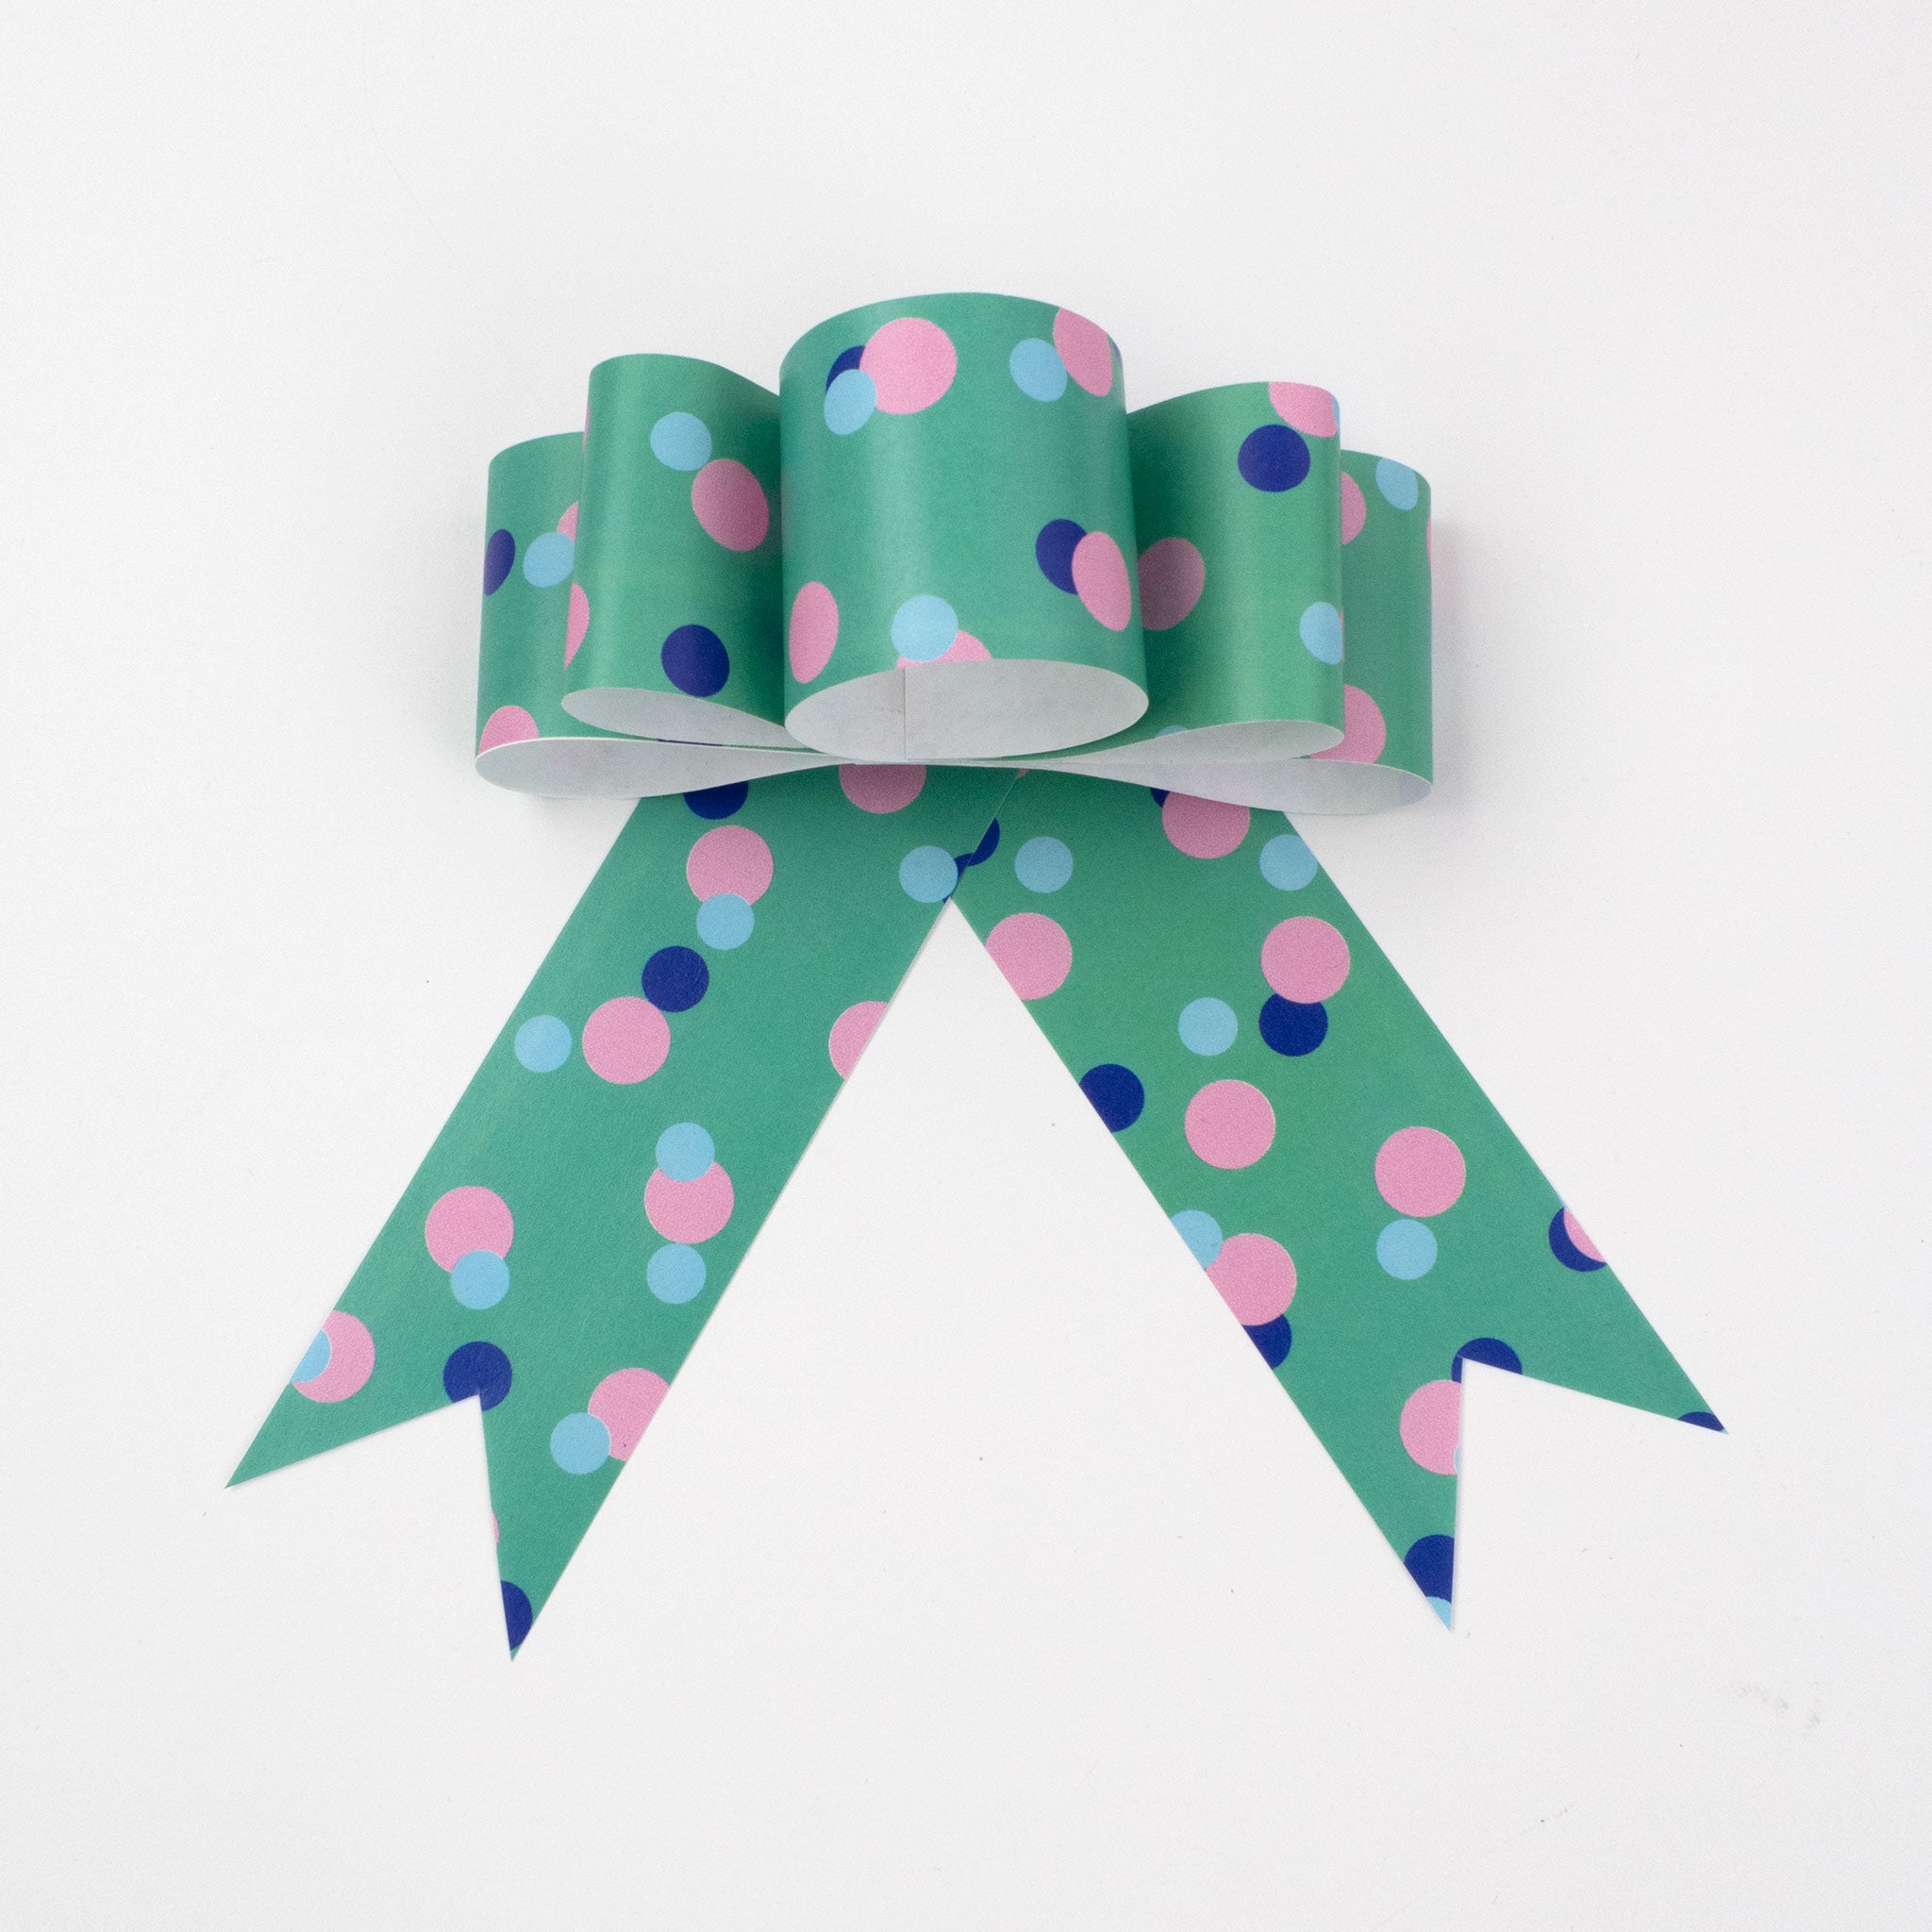 How to Make a Simple Gift Bow - Typically Simple